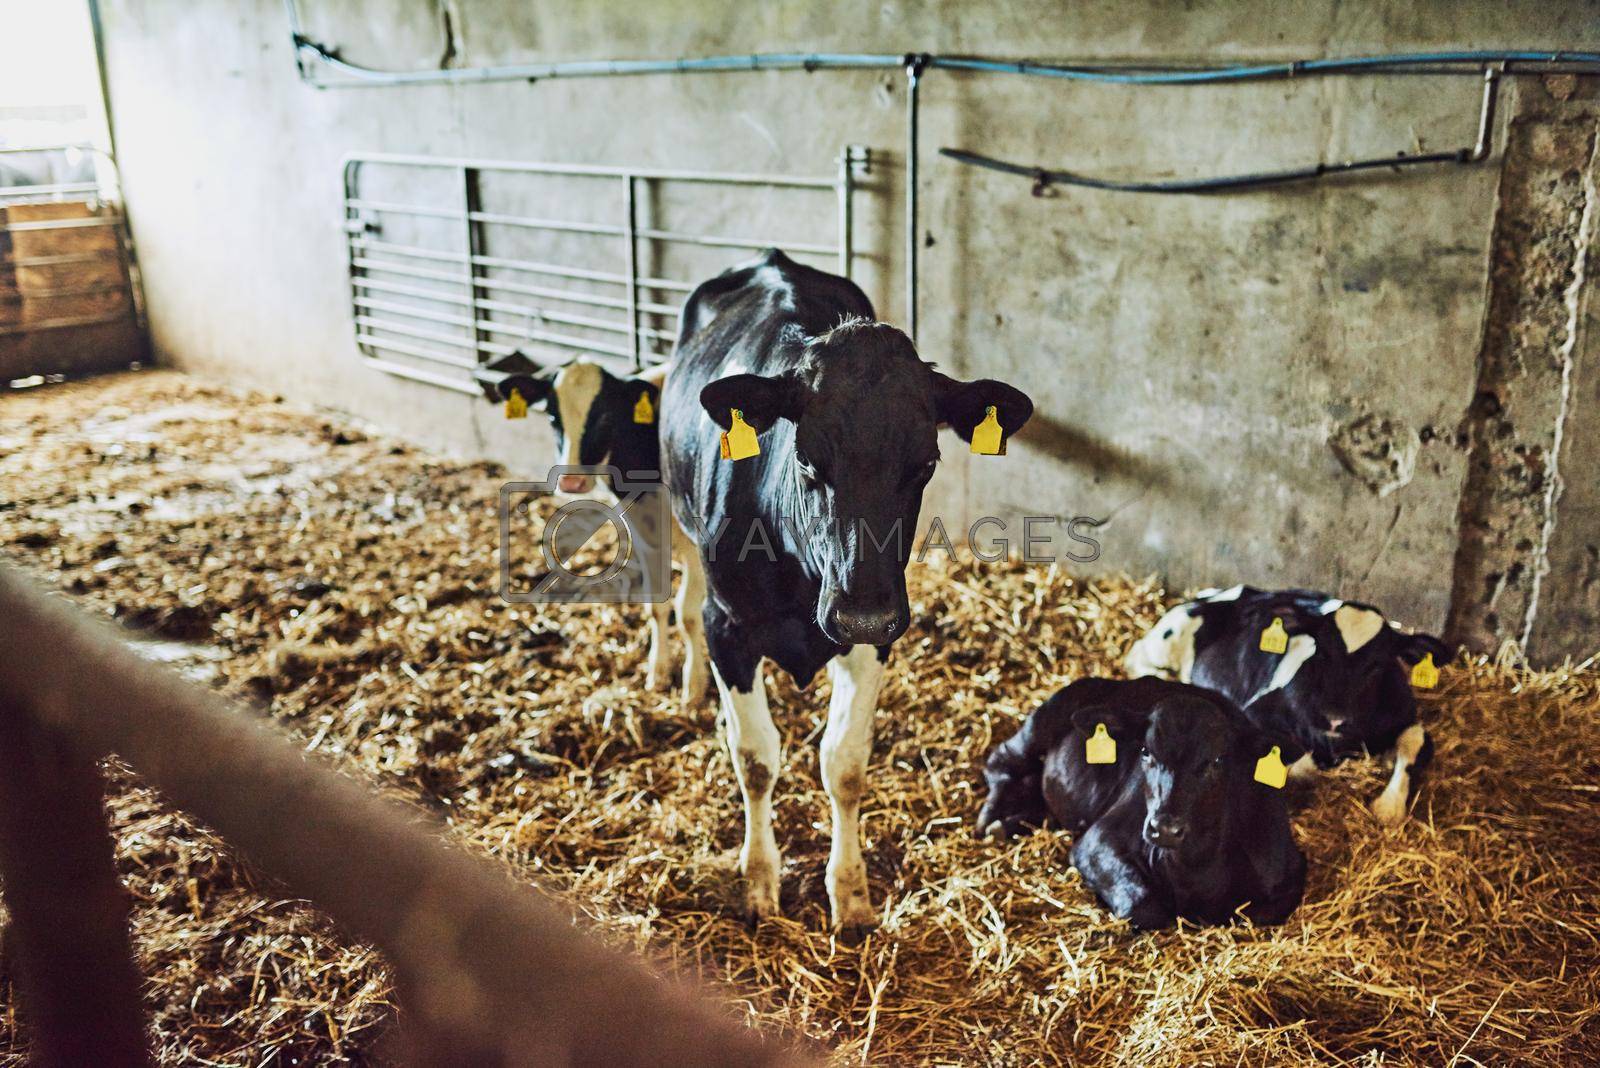 Royalty free image of These cows are well-looked after. High angle shot of two calves inside a dairy factory. by YuriArcurs